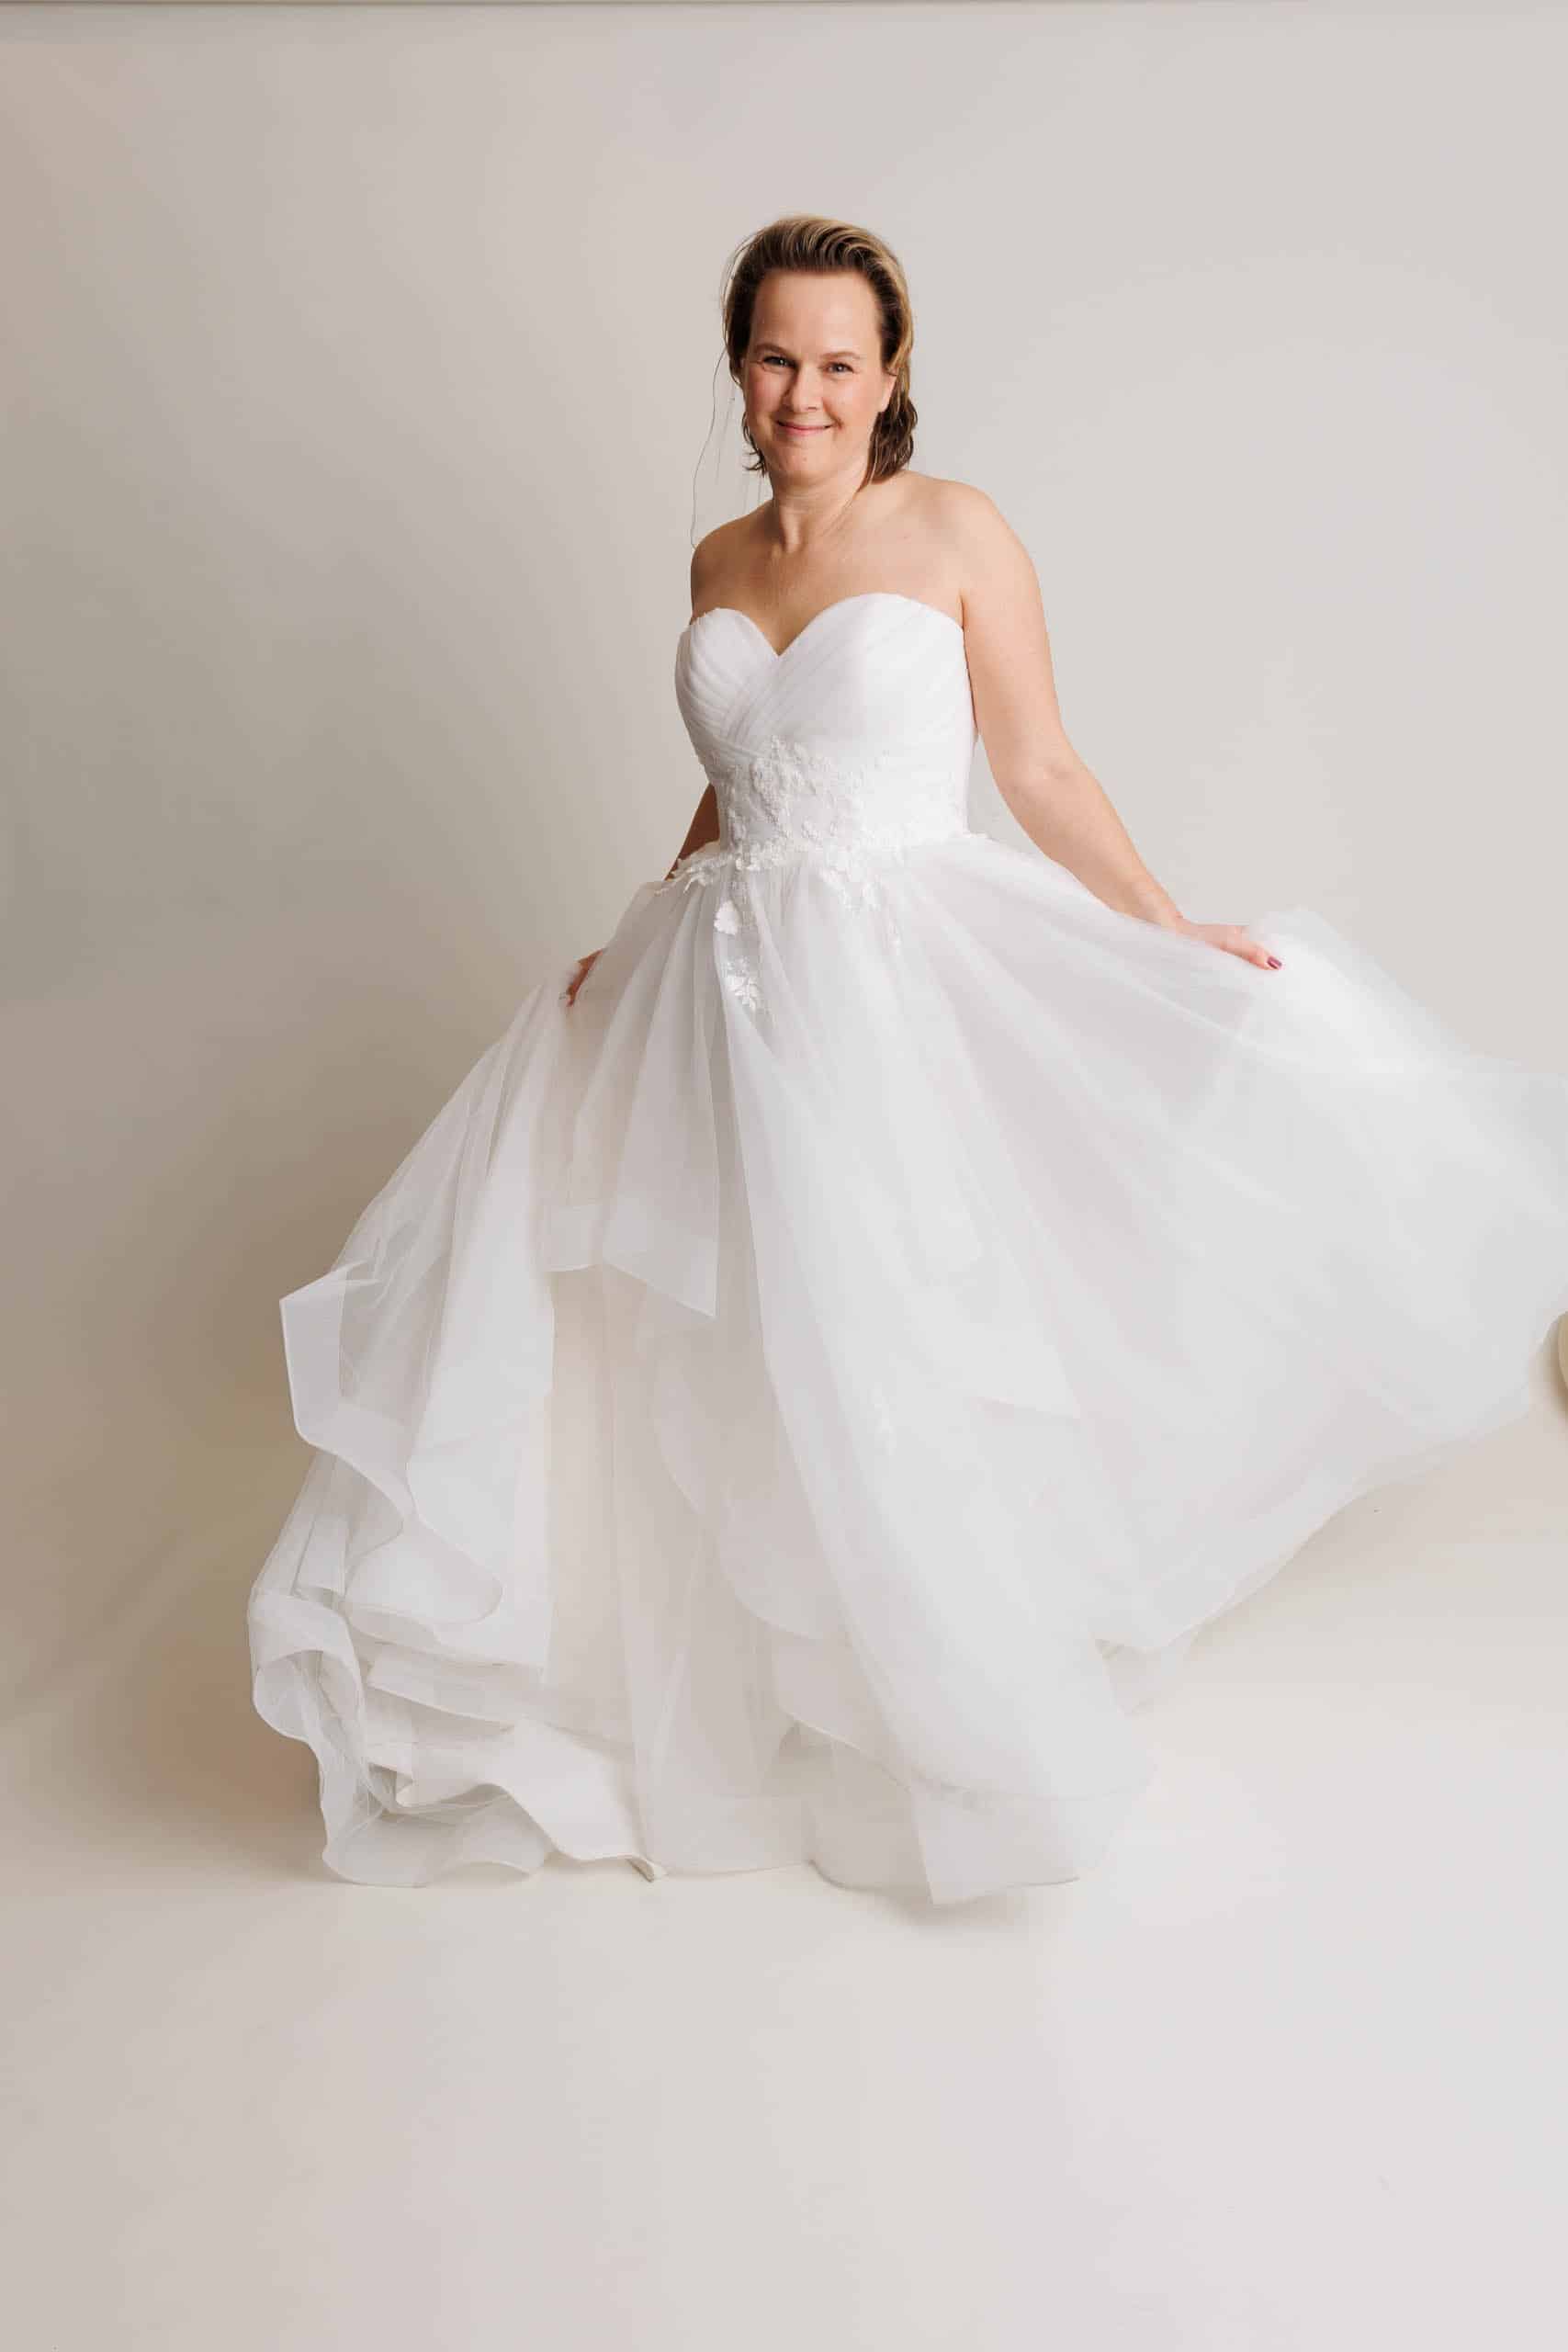 A woman in a white wedding dress poses for a photo while trying on different wedding dresses for fun.